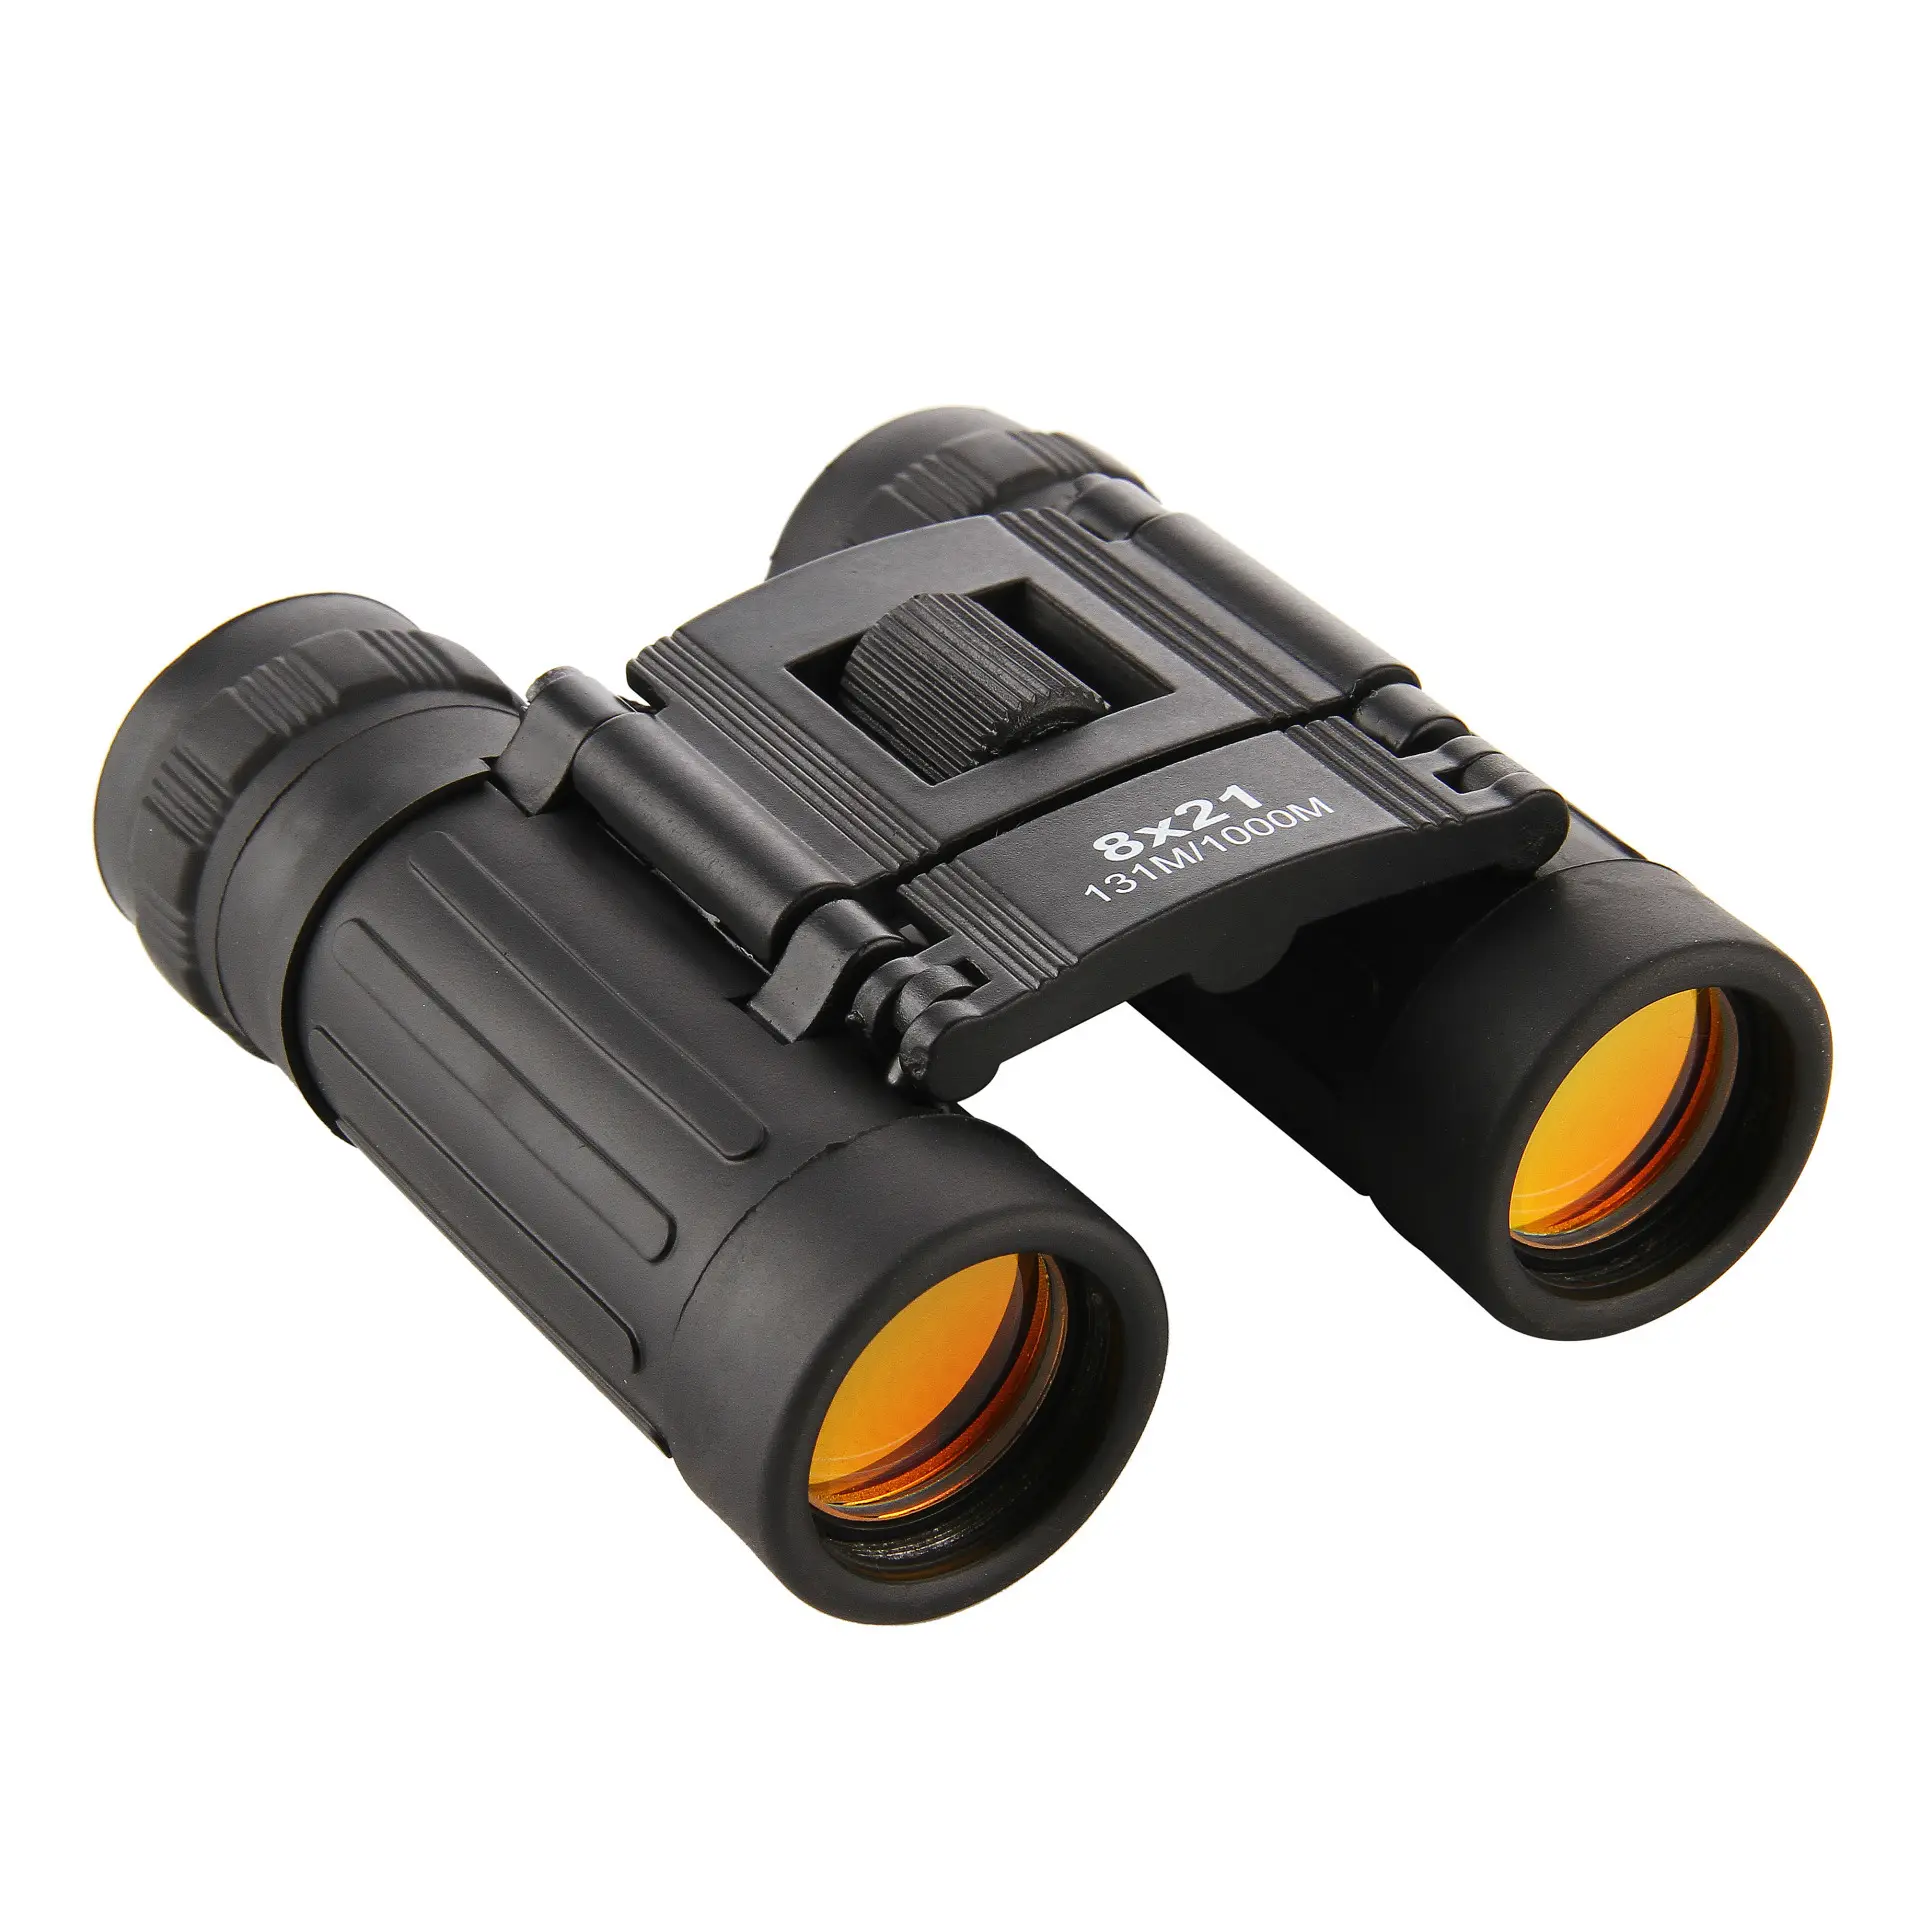 FORESEEN 8x21 High Quality Compact Portable High-Definition Binoculars